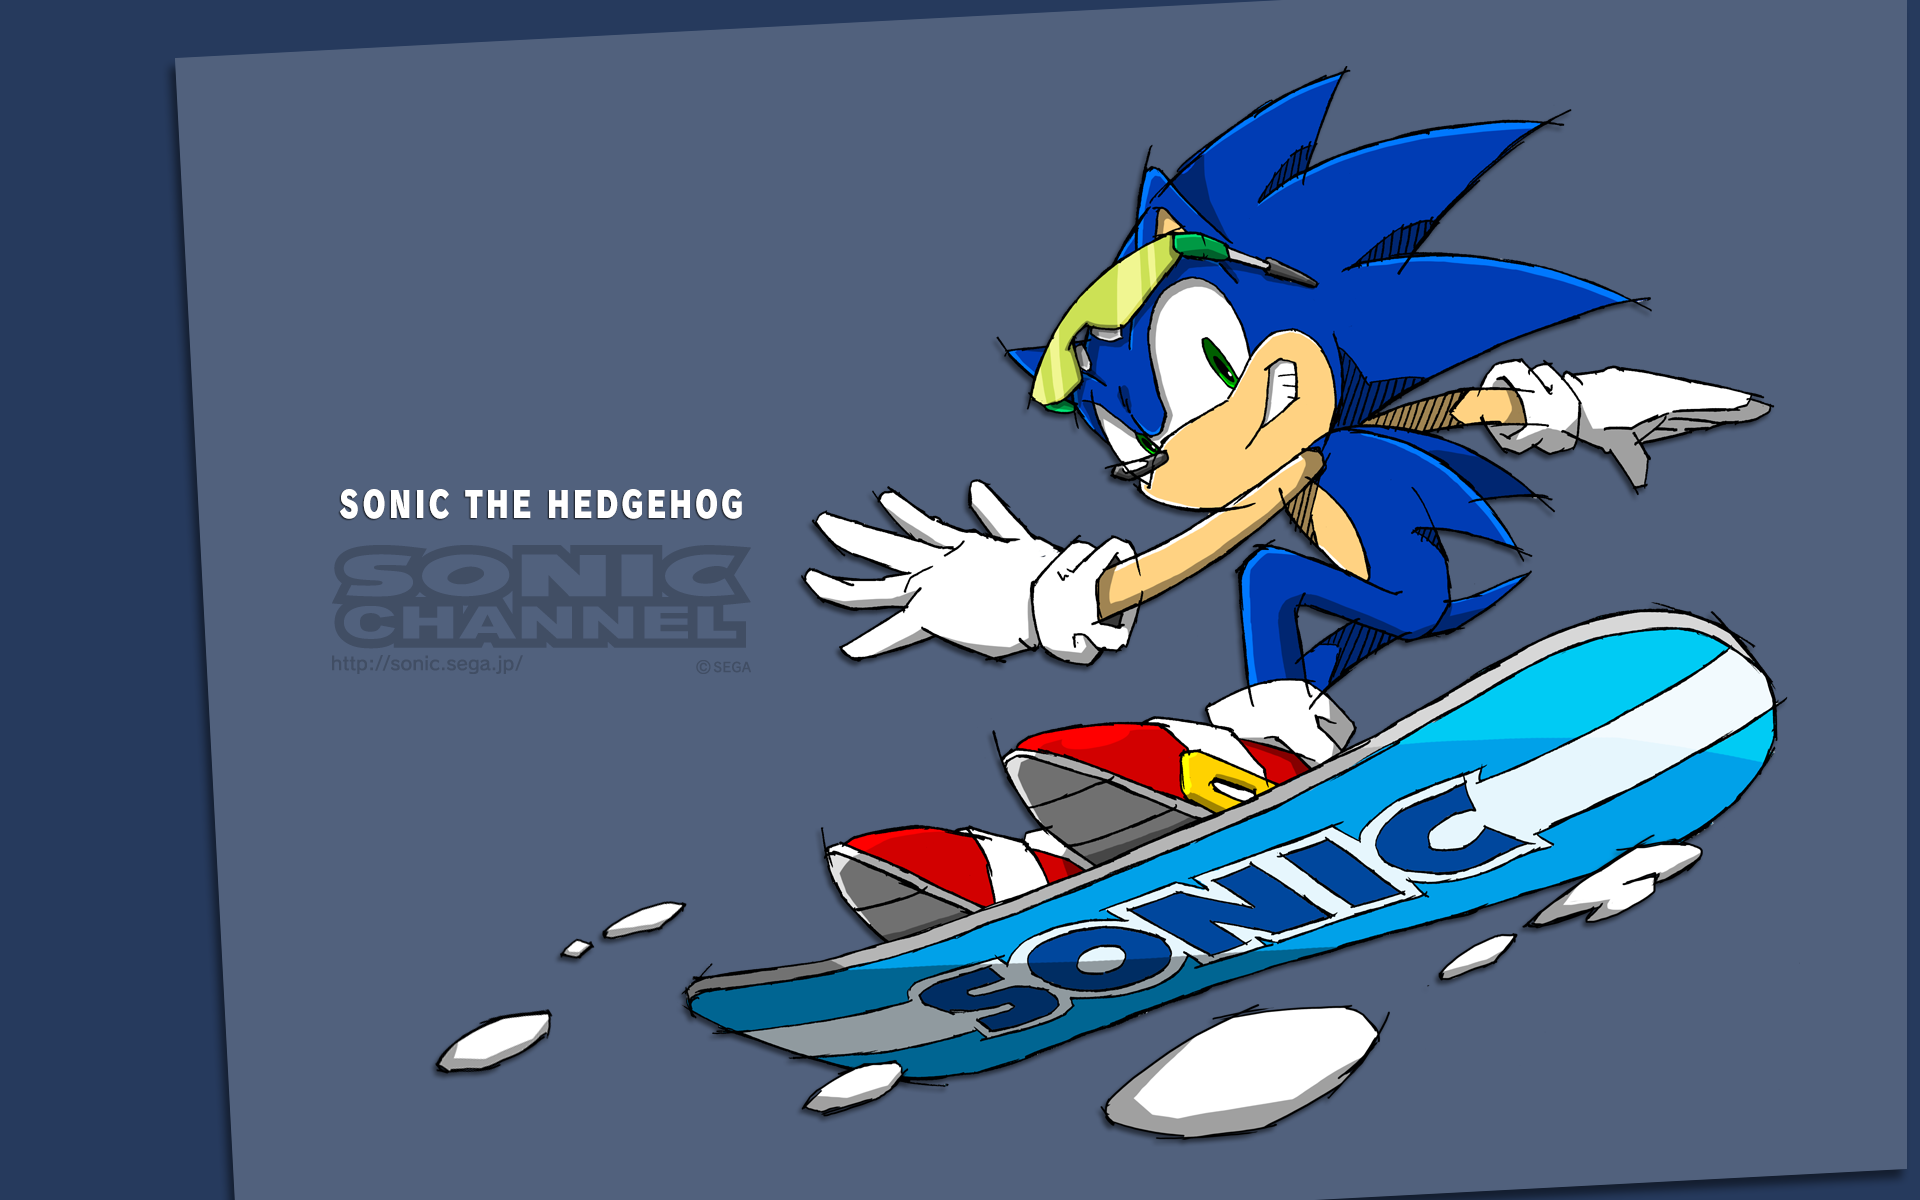 Sonic the Hedgehog (January 2013) Channel Wallpaper